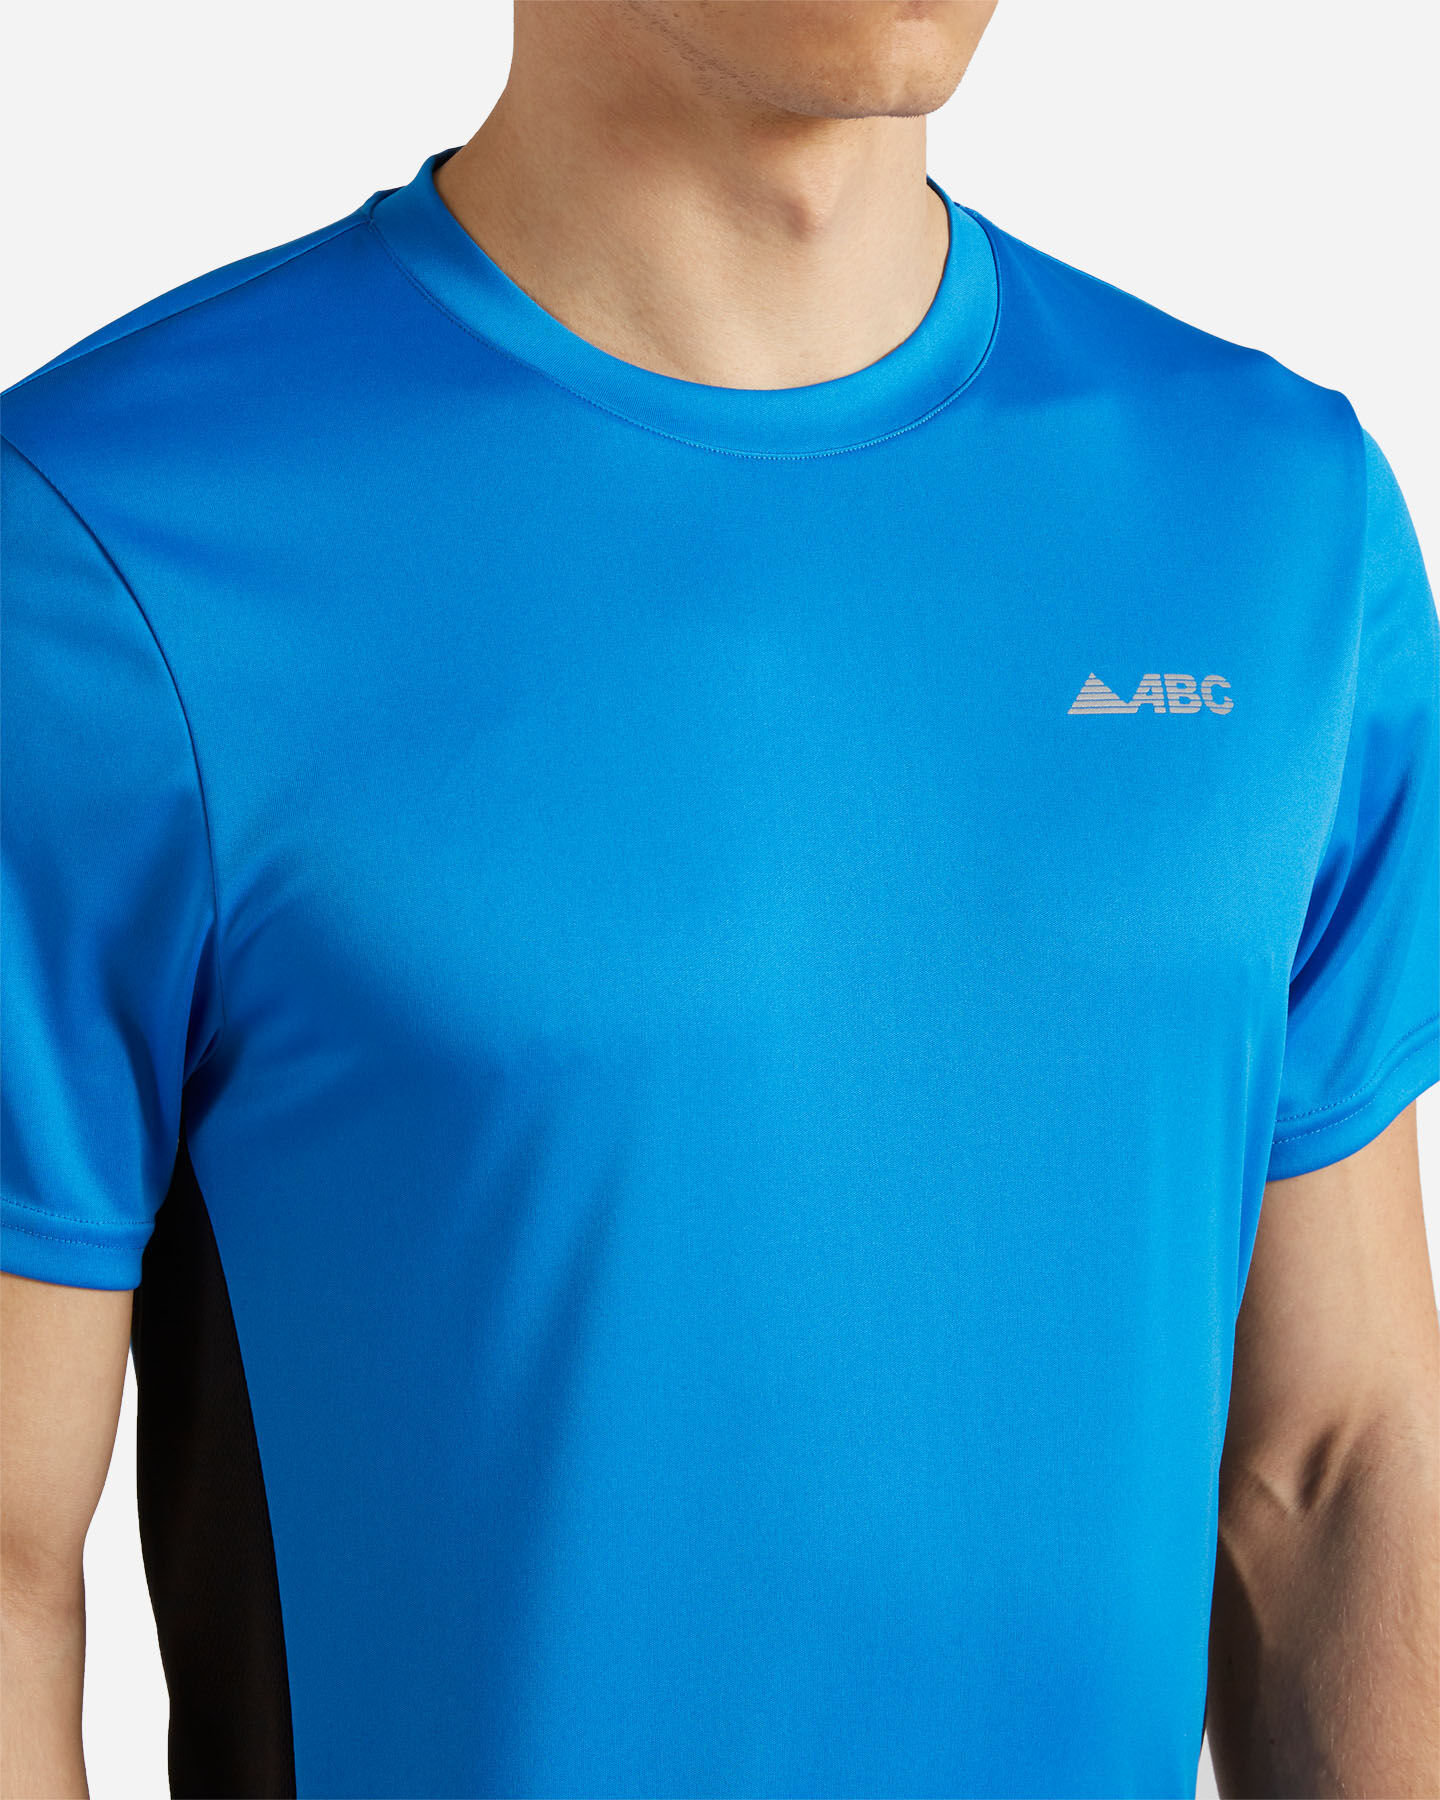  T-Shirt running ABC SPARK M S4131076|1032/050|S scatto 4